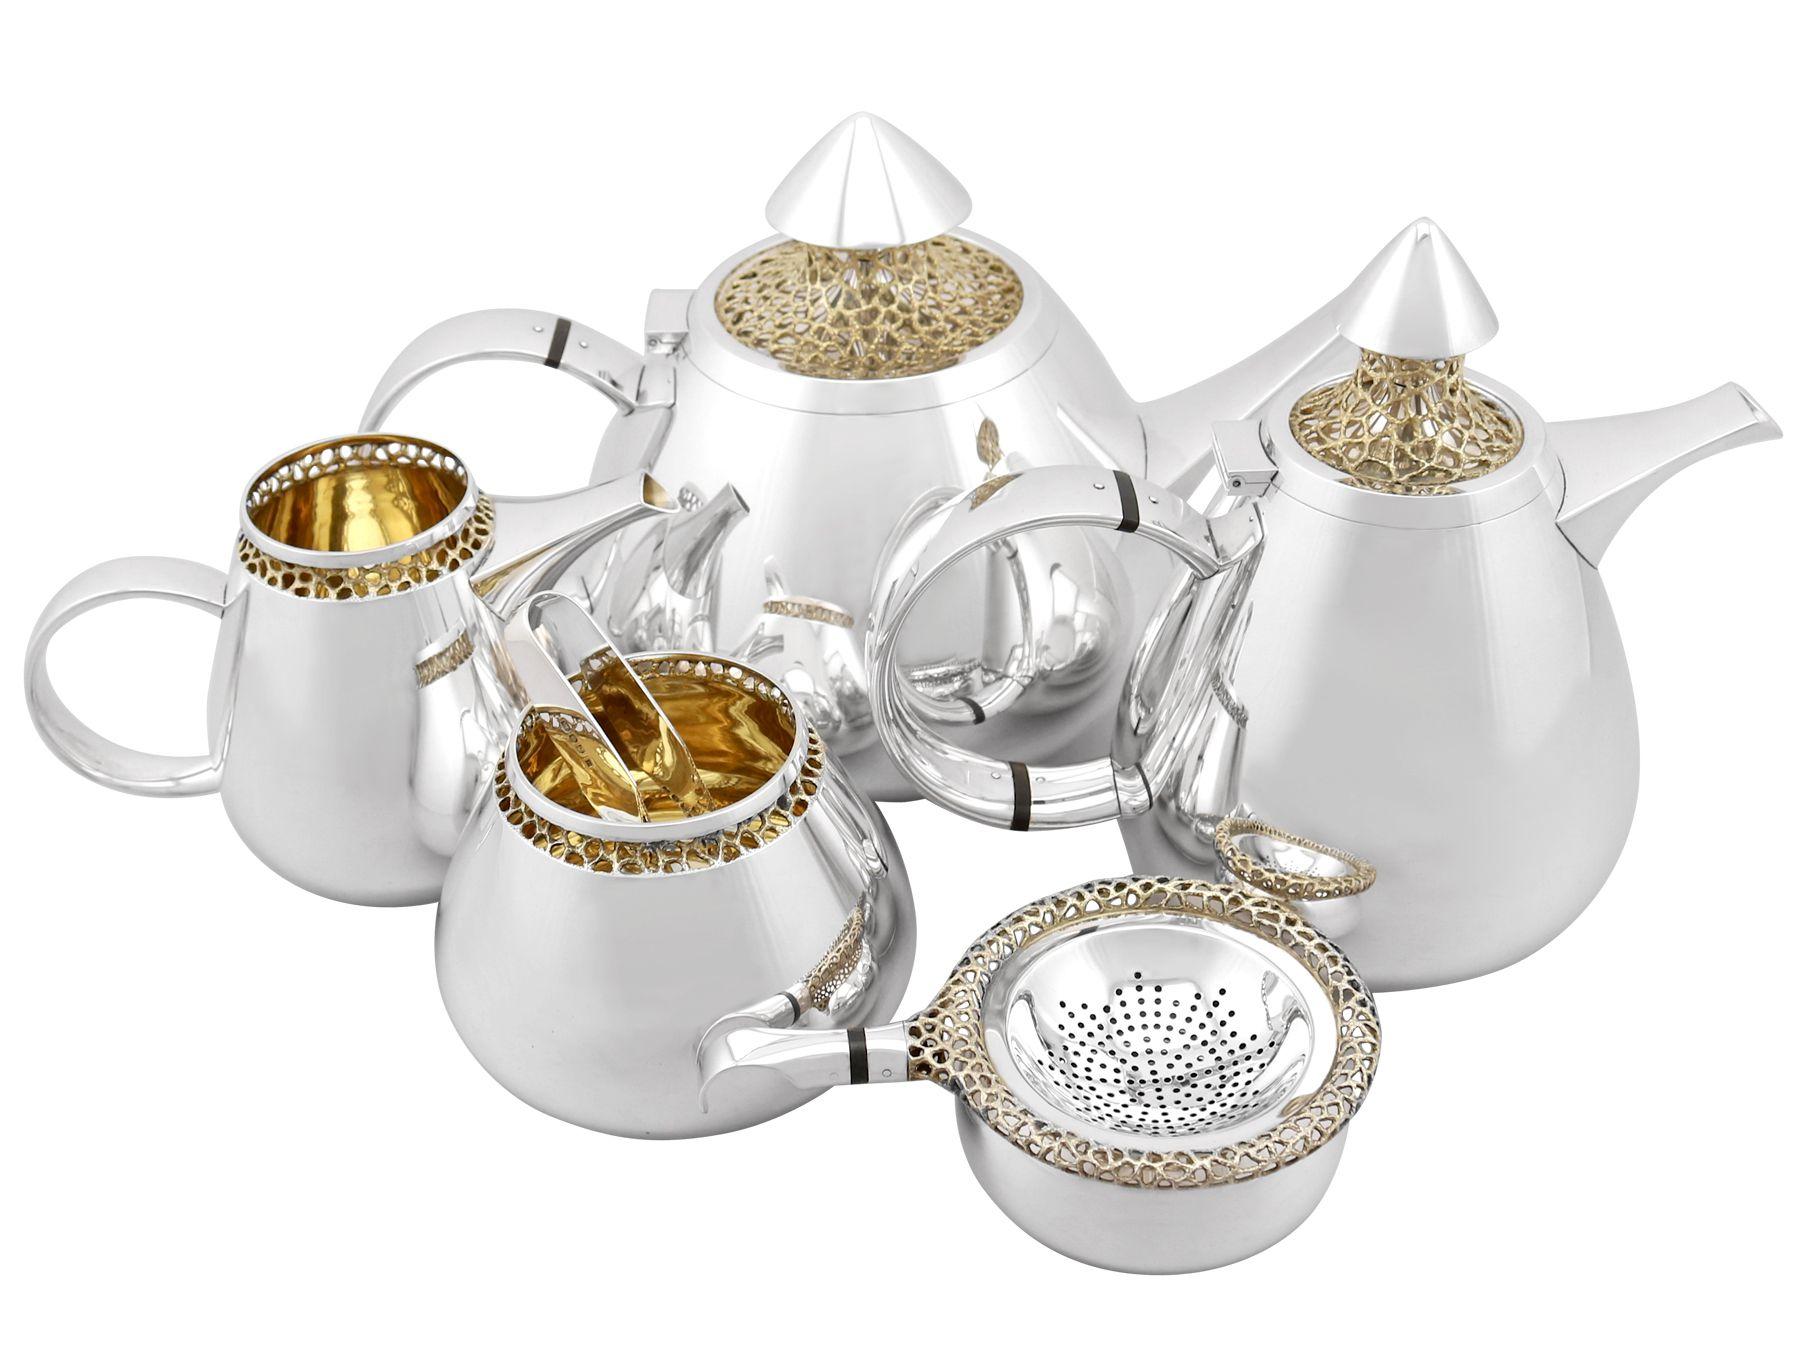 An exceptional, fine, impressive, large and unusual vintage Elizabeth II English sterling silver six piece design tea and coffee service made by Ian Calvert; an addition to our diverse teaware collection.

This exceptional and unusual vintage